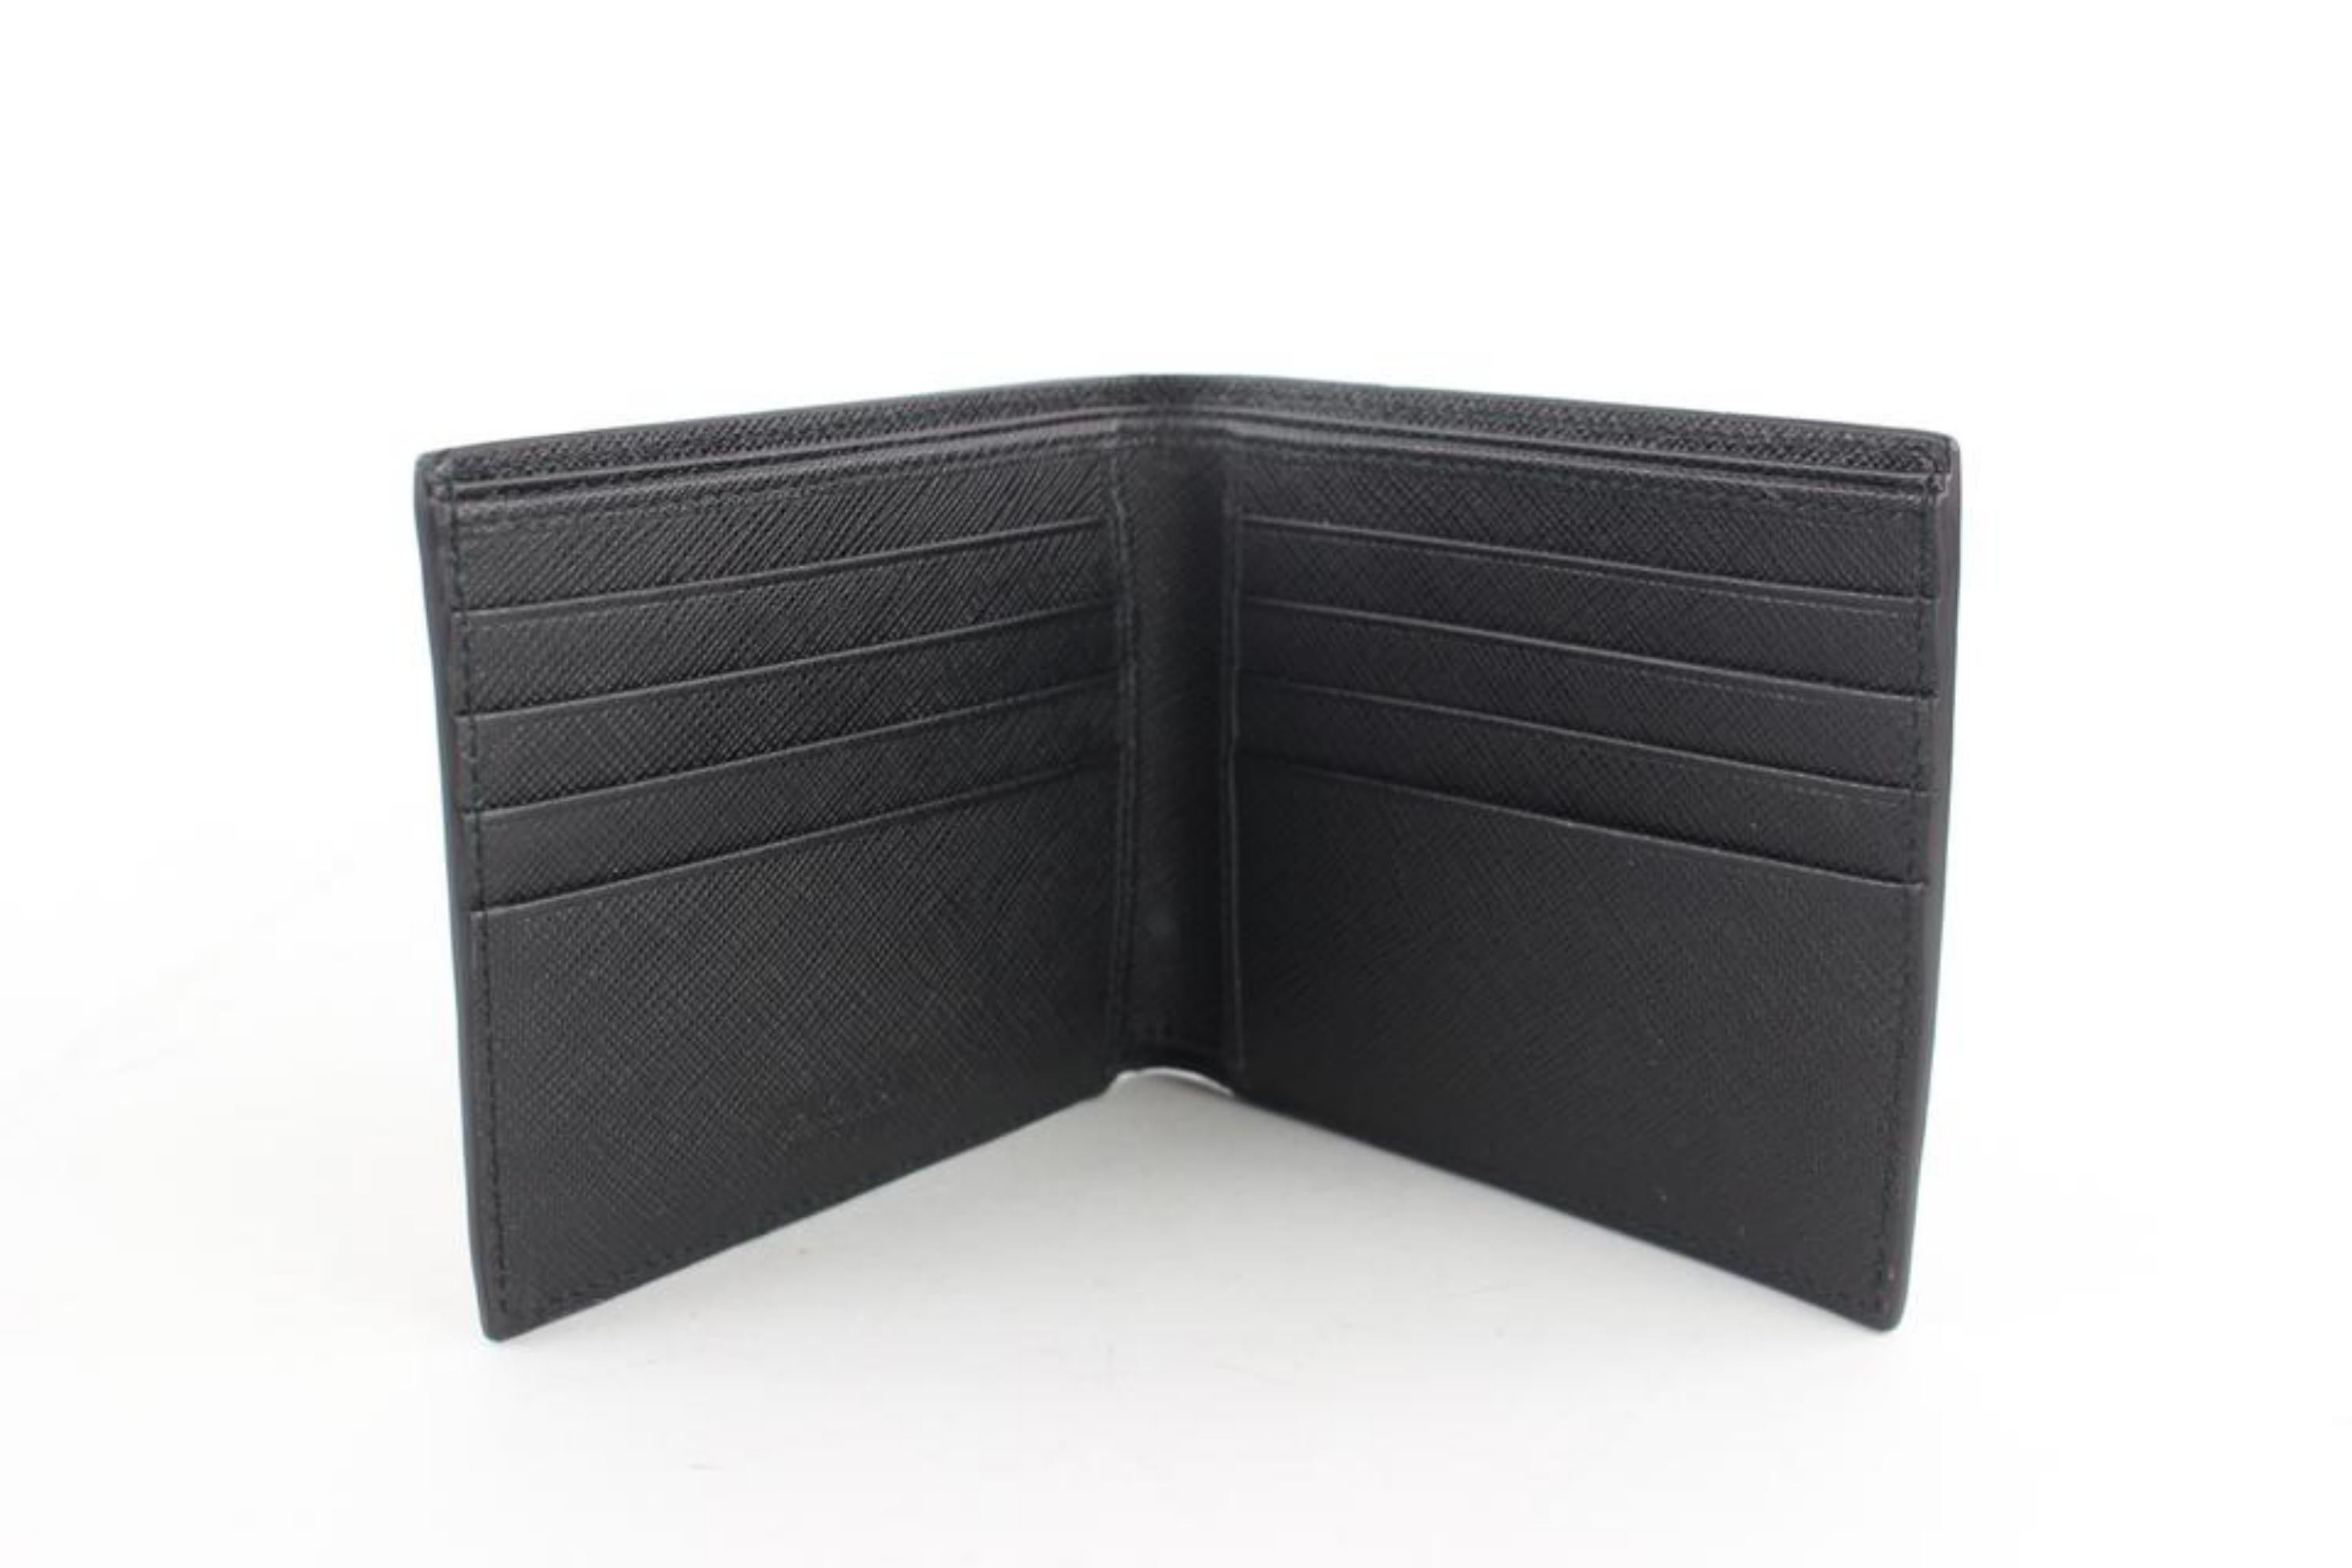 Prada Black Limited Saffiano Leather Bifold 19prz1912 Wallet In New Condition For Sale In Forest Hills, NY